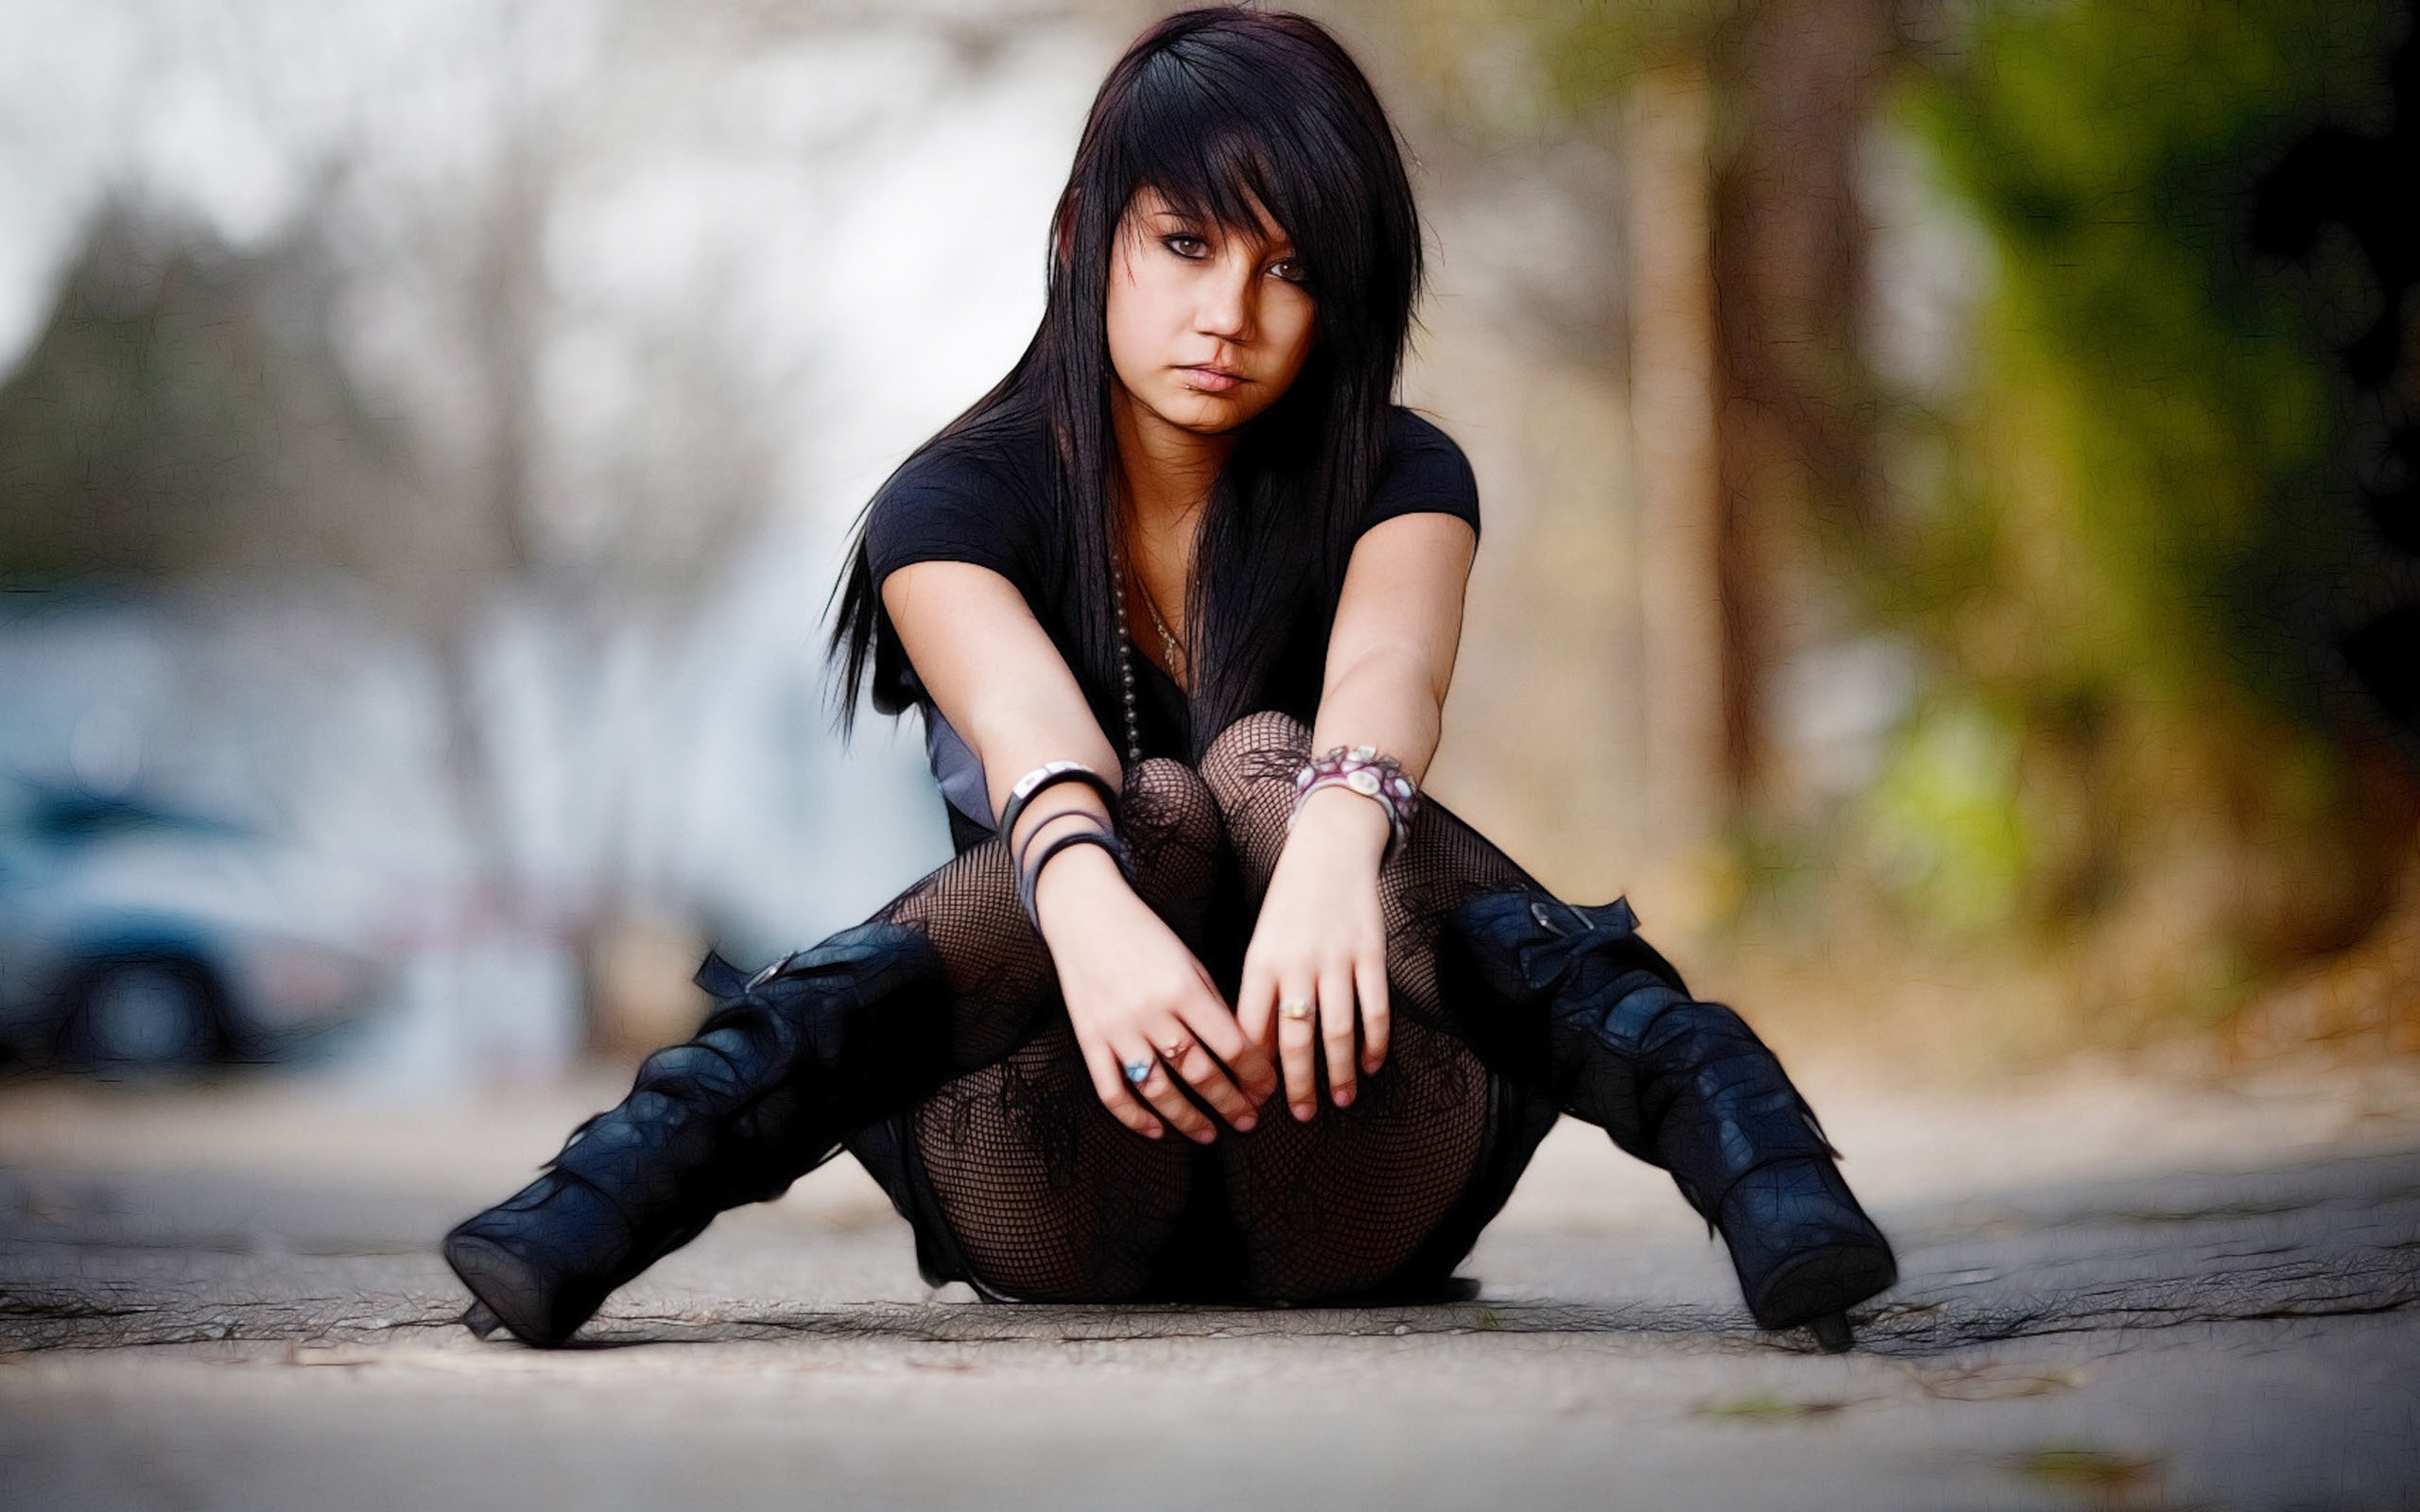 Gothic Model 4 Wallpaper From Gothic Girls Wal 4433 - Goth Girl Hot , HD Wallpaper & Backgrounds